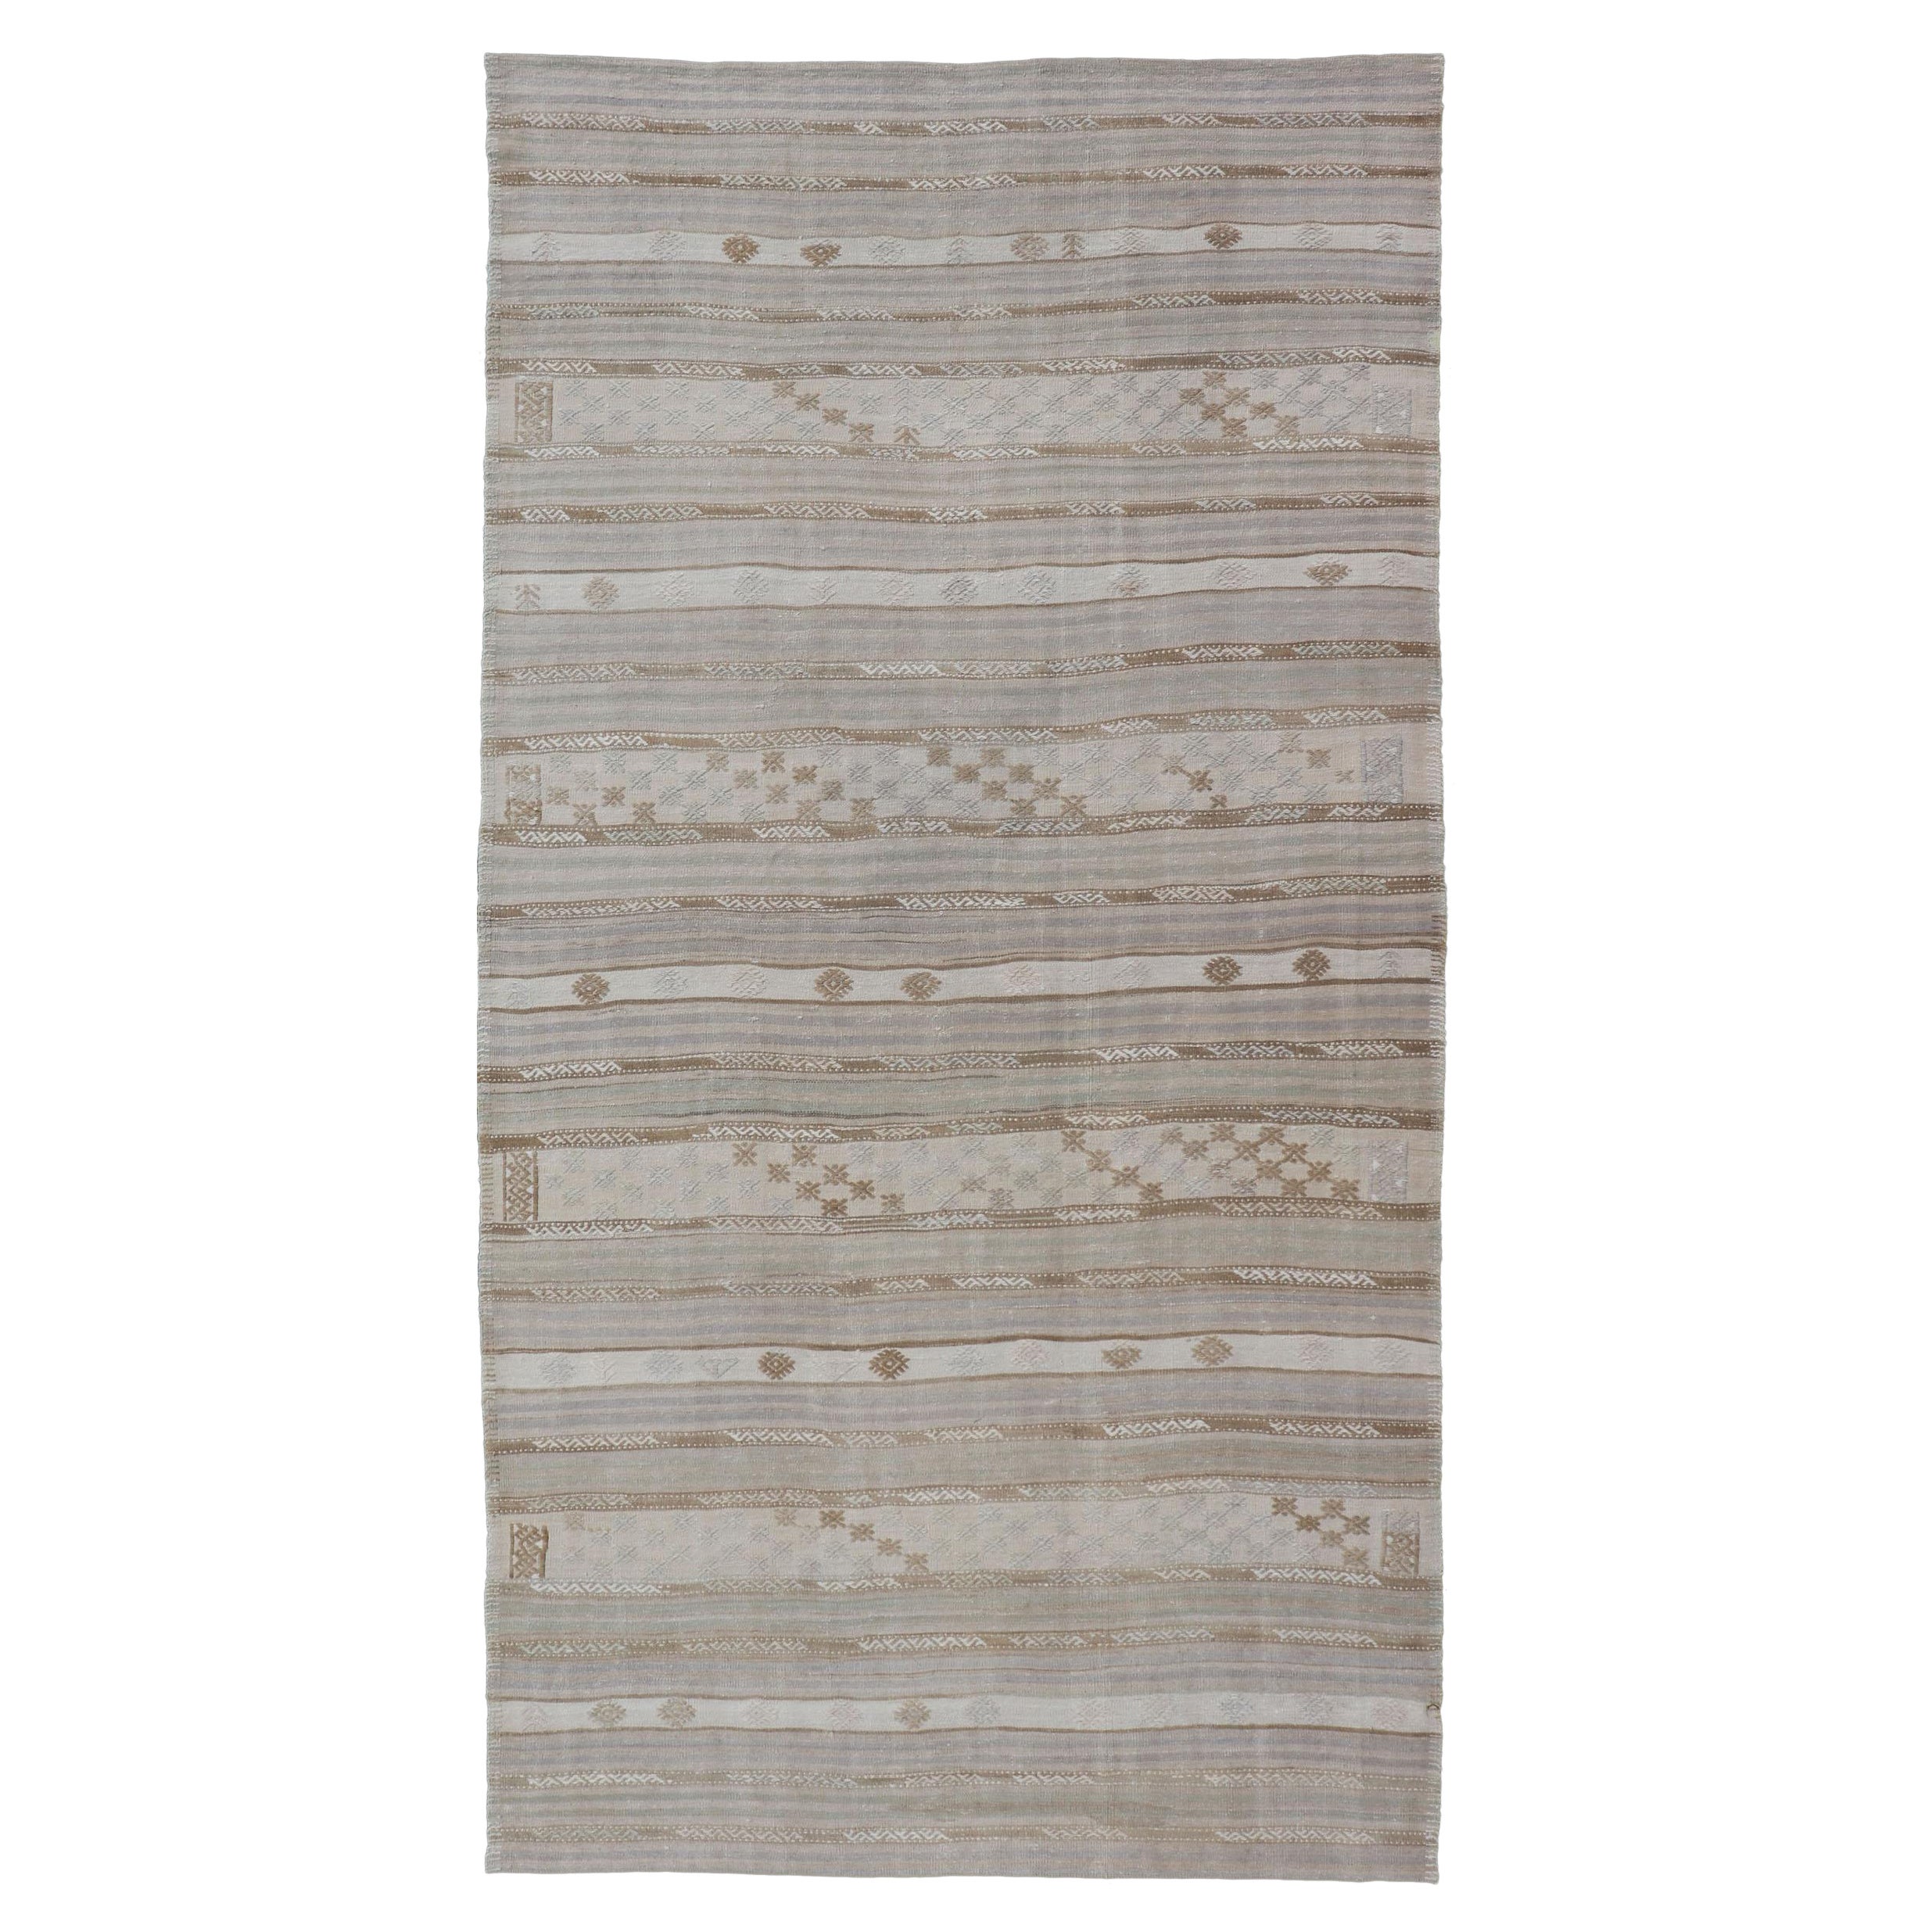 Striped Turkish Flat-Weave Kilim in Muted Colors and Tribal Motifs